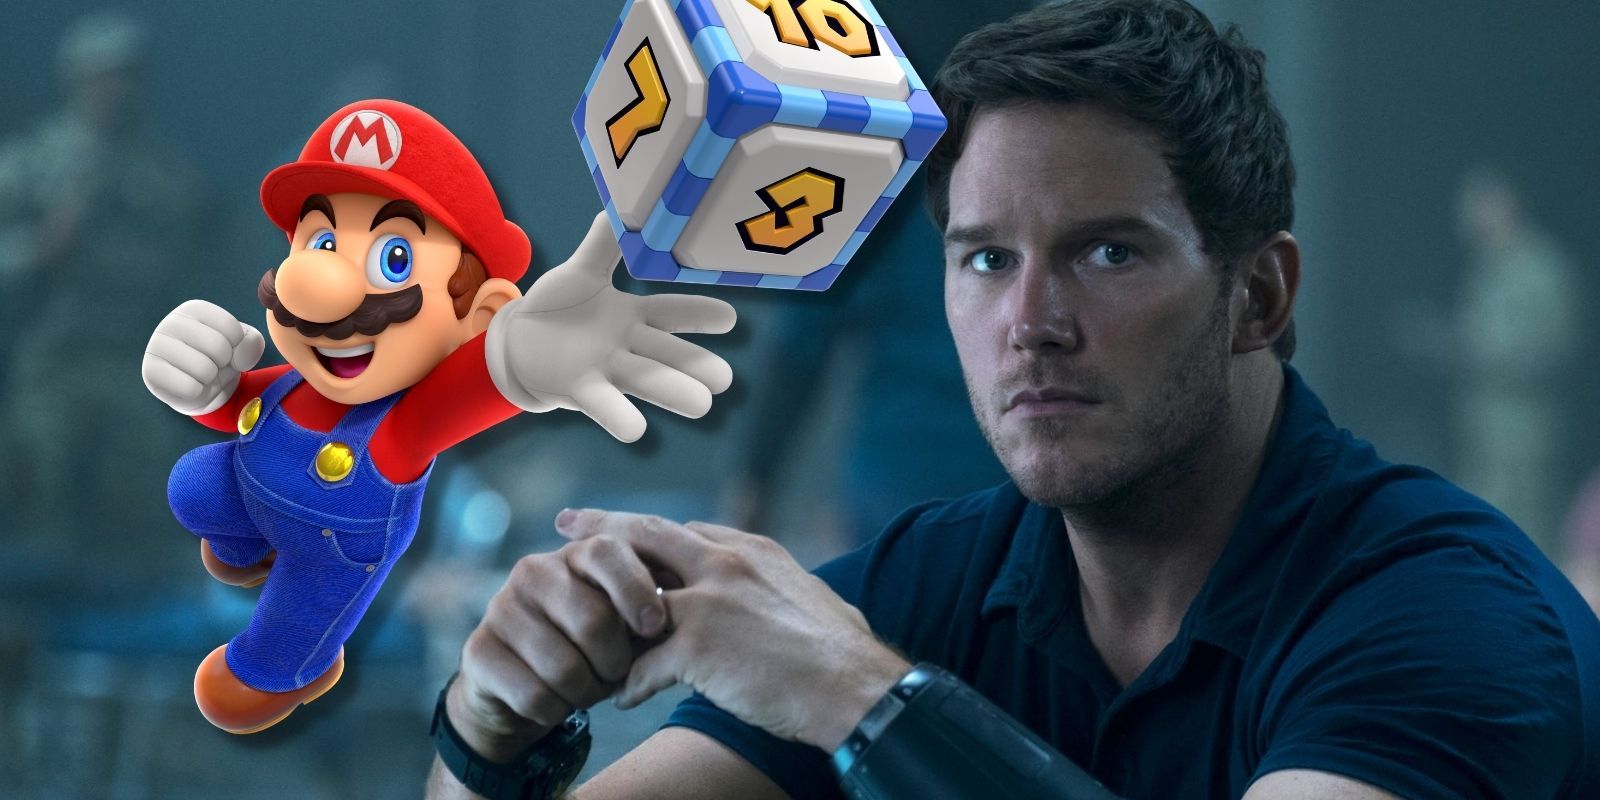 Mario throws a blue and white dice while Chris Pratt stares into the audience